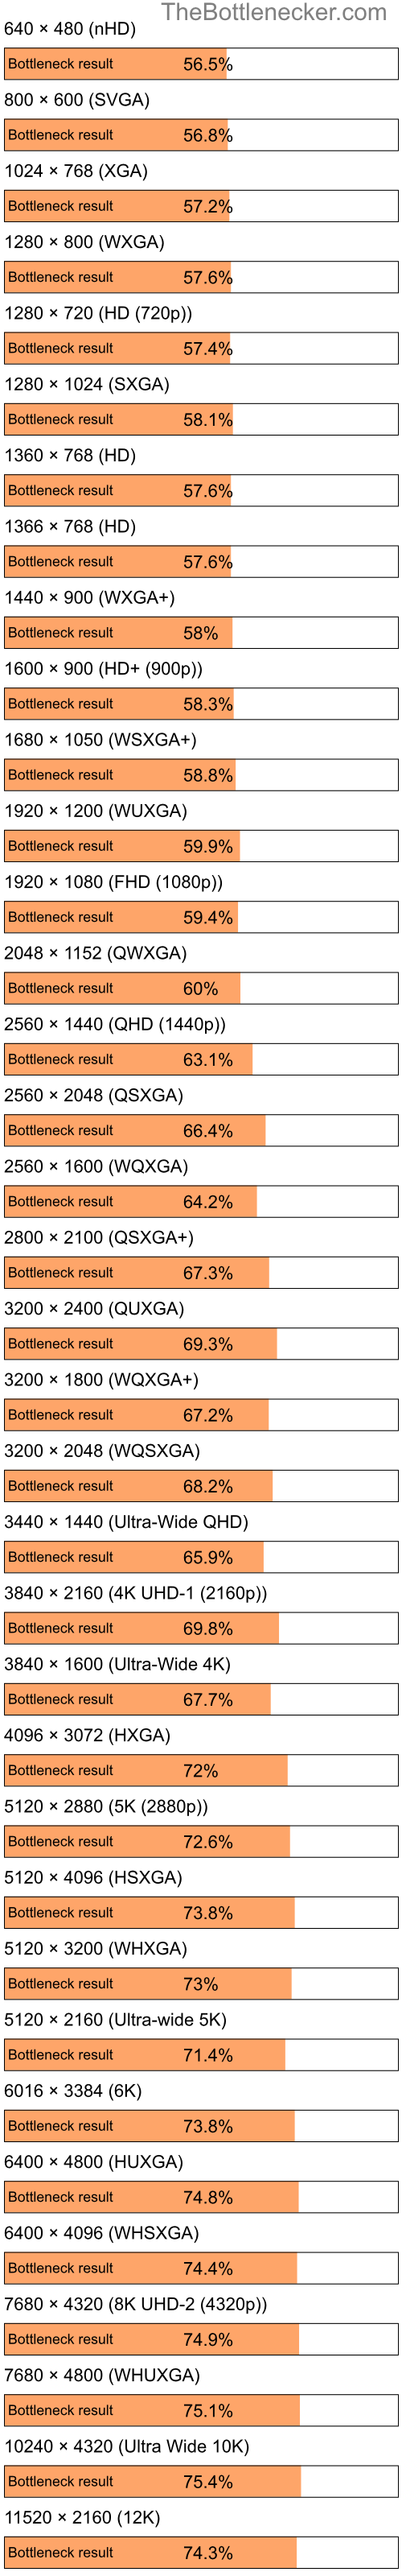 Bottleneck results by resolution for Intel Pentium 4 and AMD Radeon X1300 PRO in Processor Intense Tasks